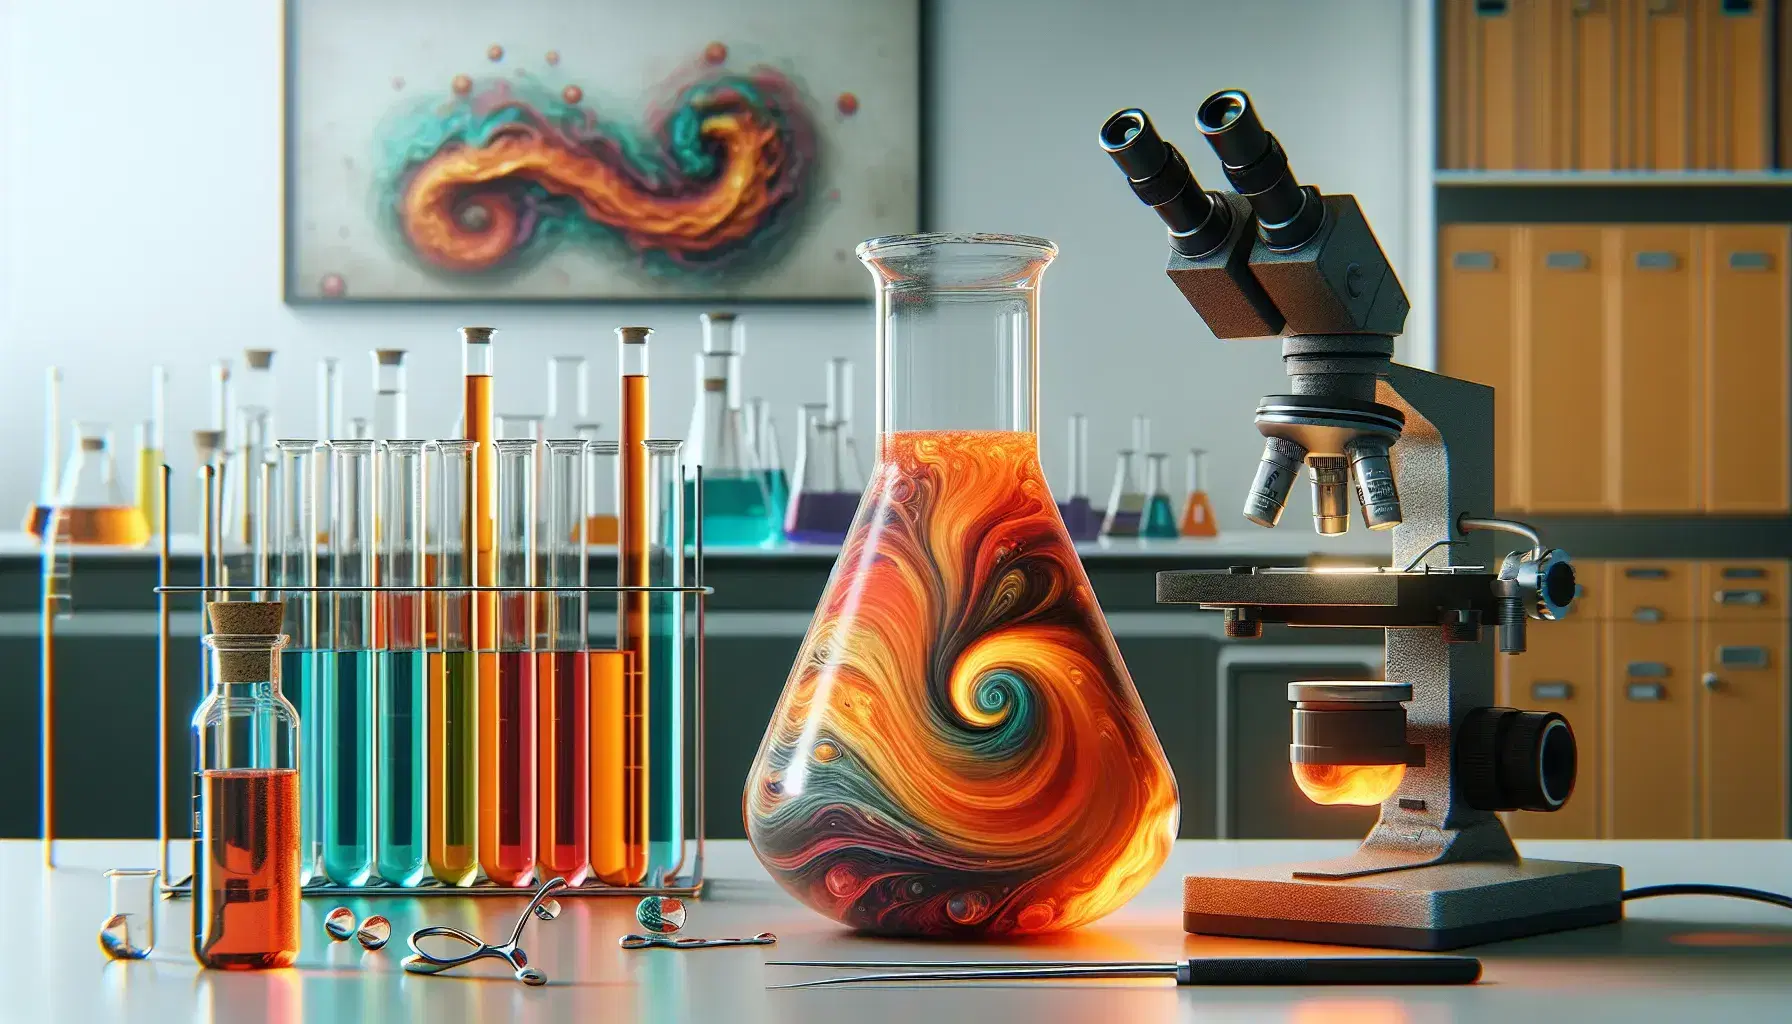 Laboratory scene with a swirling orange-red liquid in a glass flask on a stirrer, test tubes with colored liquids, microscope, tweezers, and pipette.